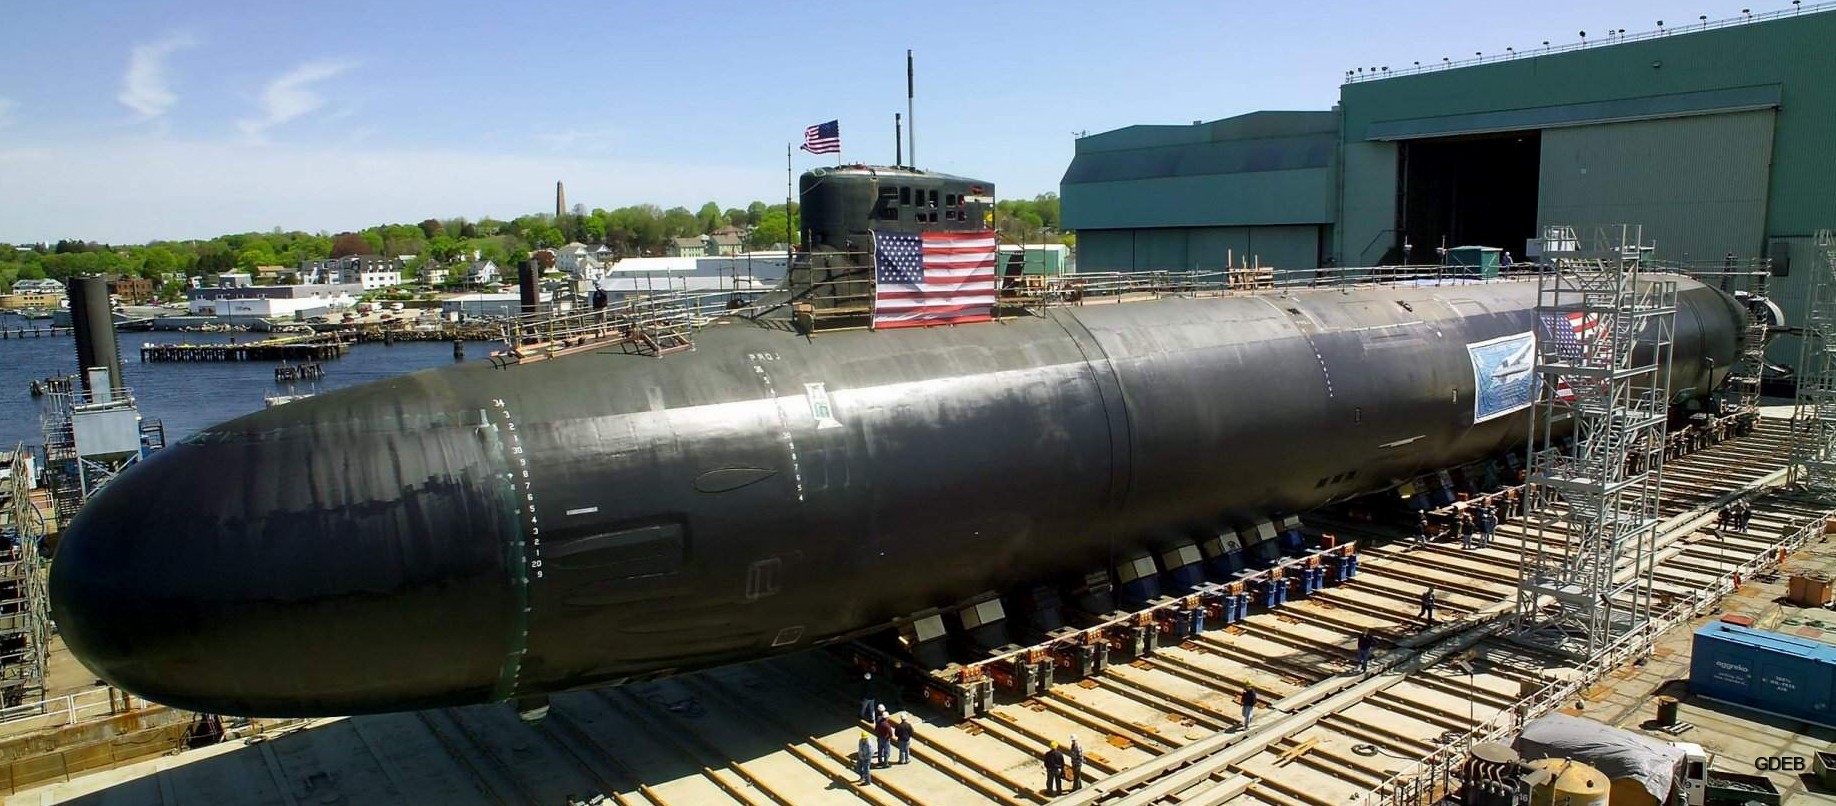 ssn-23 uss jimmy carter seawolf class attack submarine us navy general dynamics electric boat groton connecticut 15